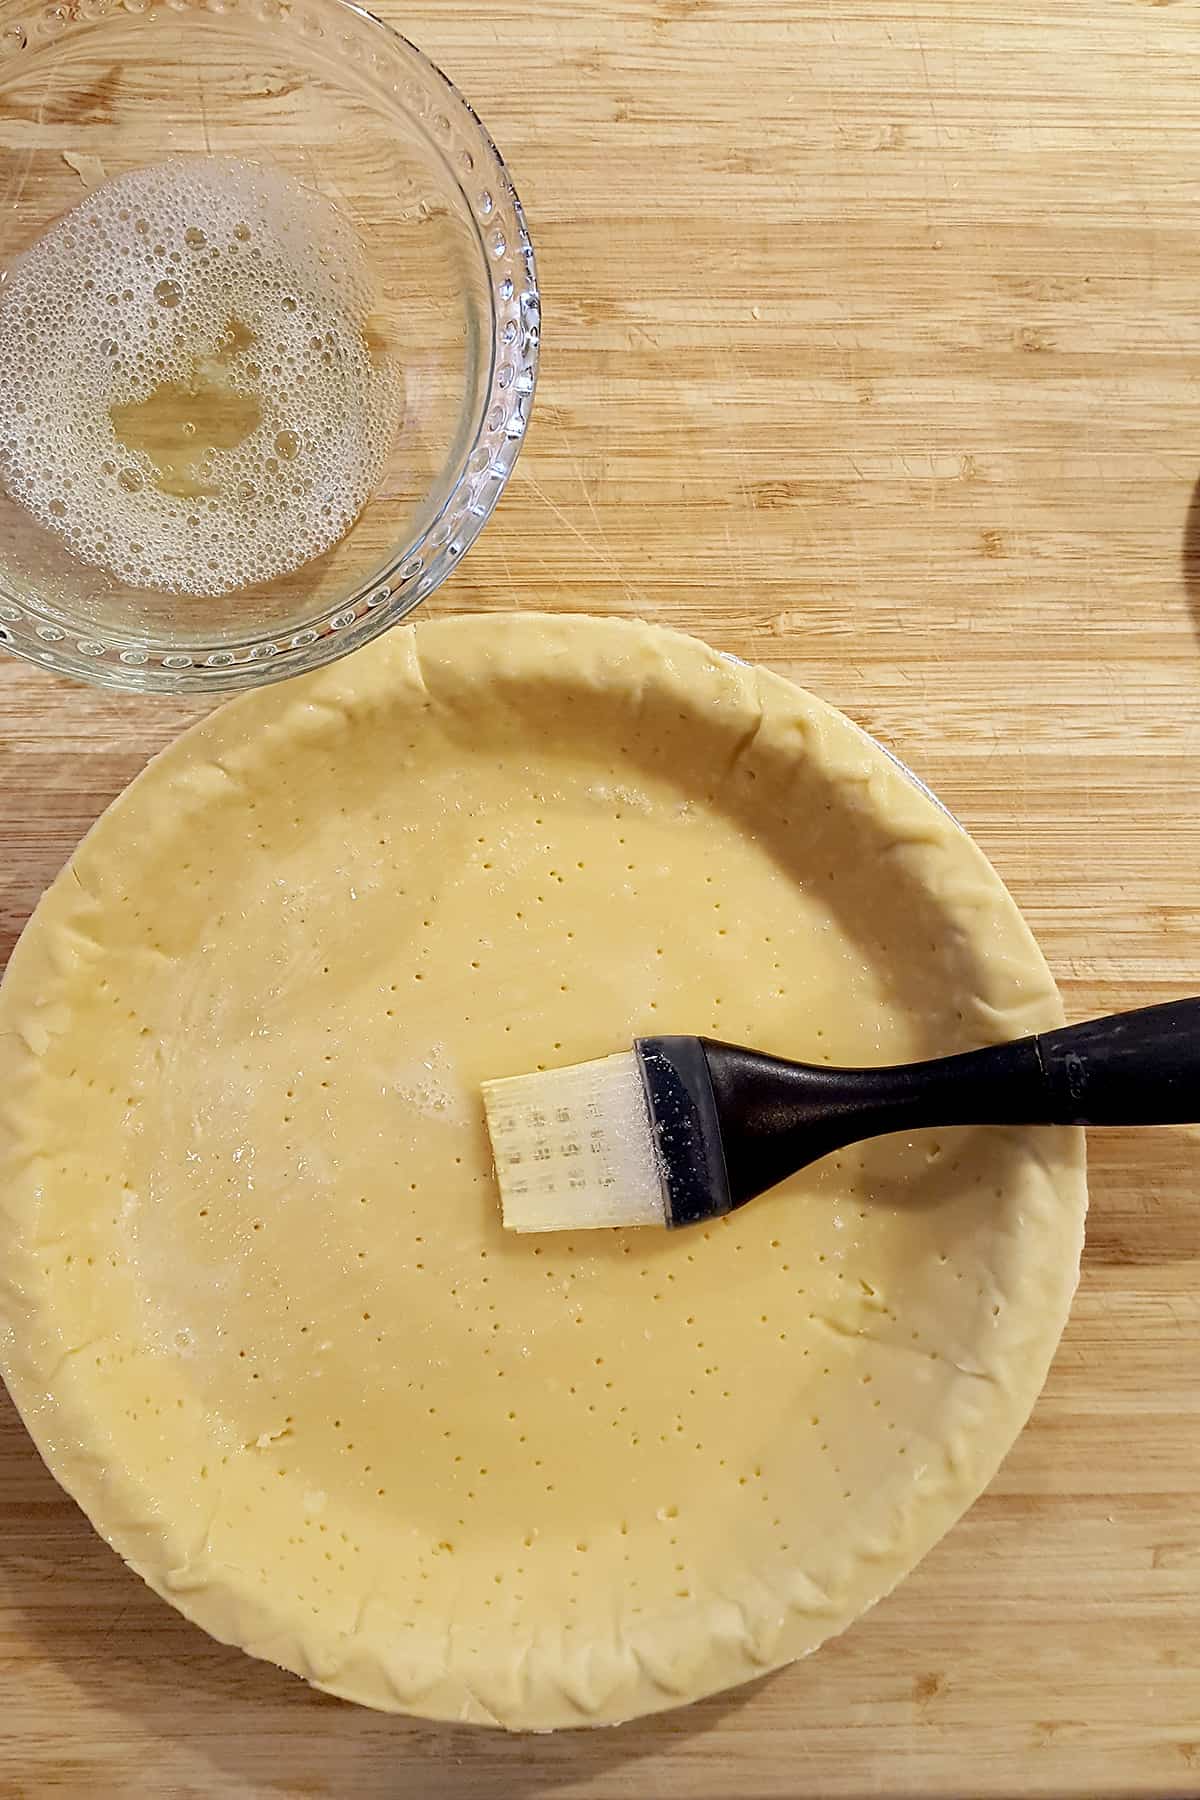 Thawed pie crust brushed with beaten egg white.